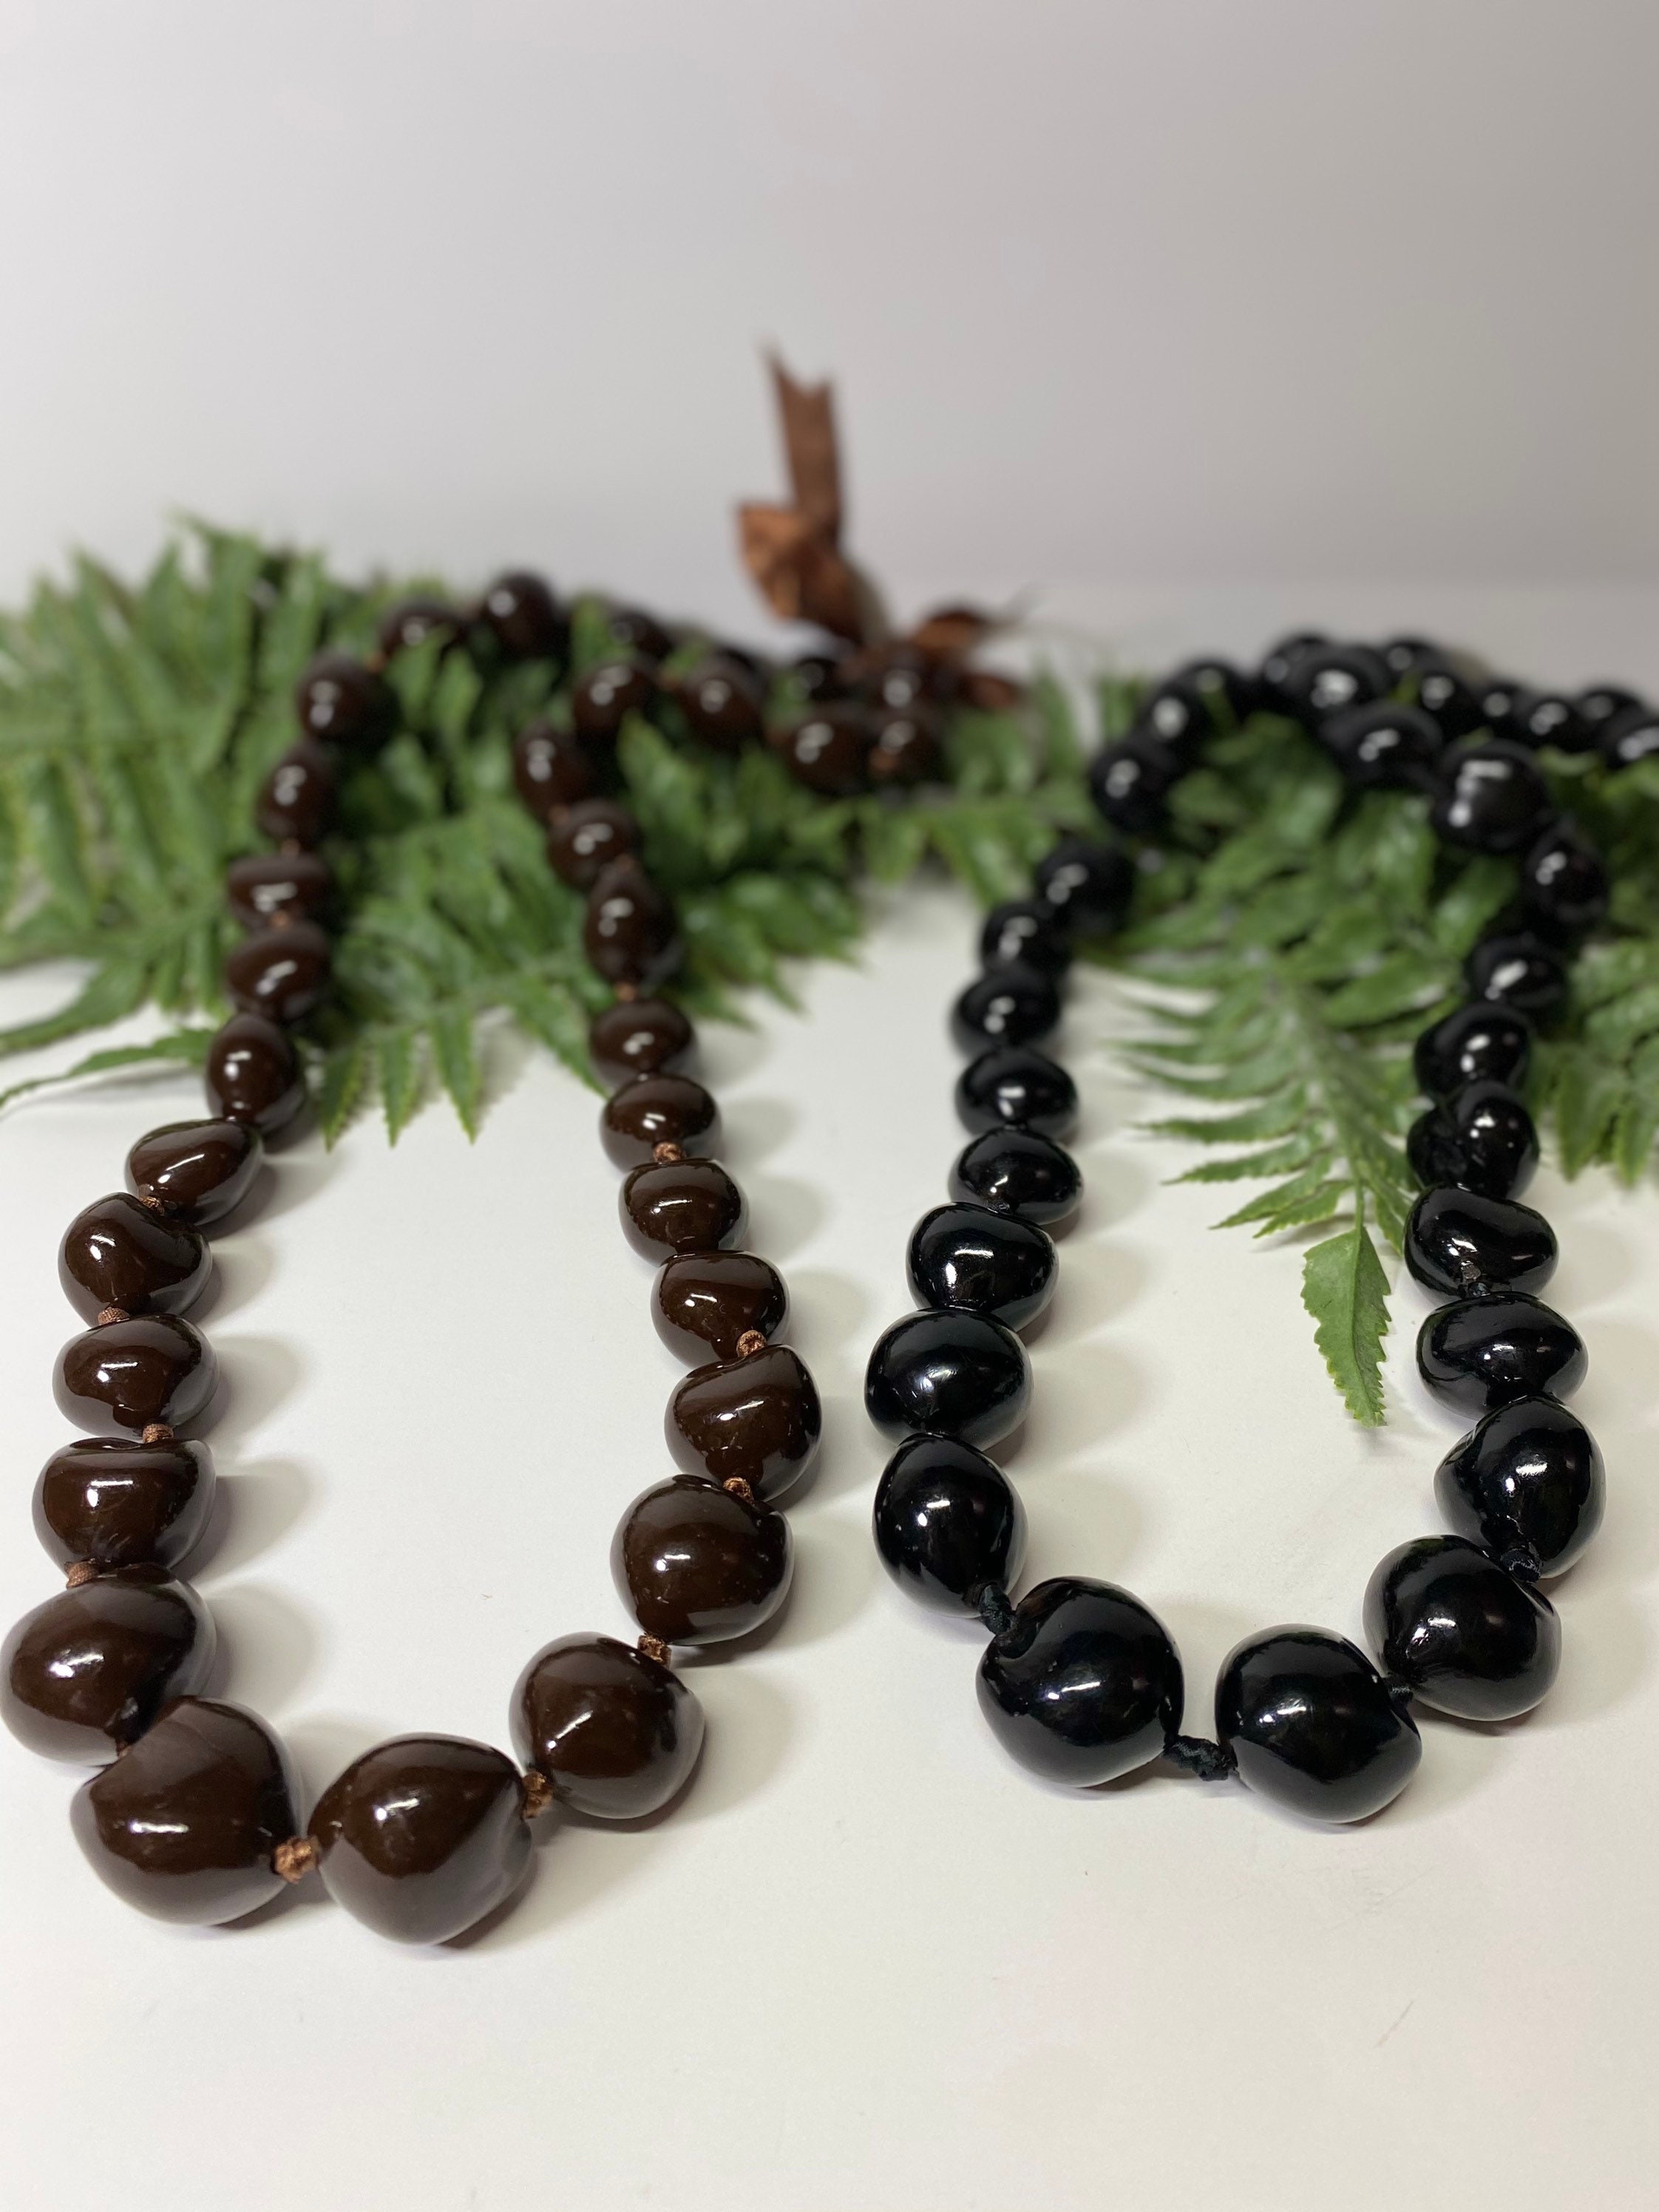 Hawaii Black Kukui Nut Leis with Flower Necklace 30 Inches (Black with  Purple flower) - Walmart.com